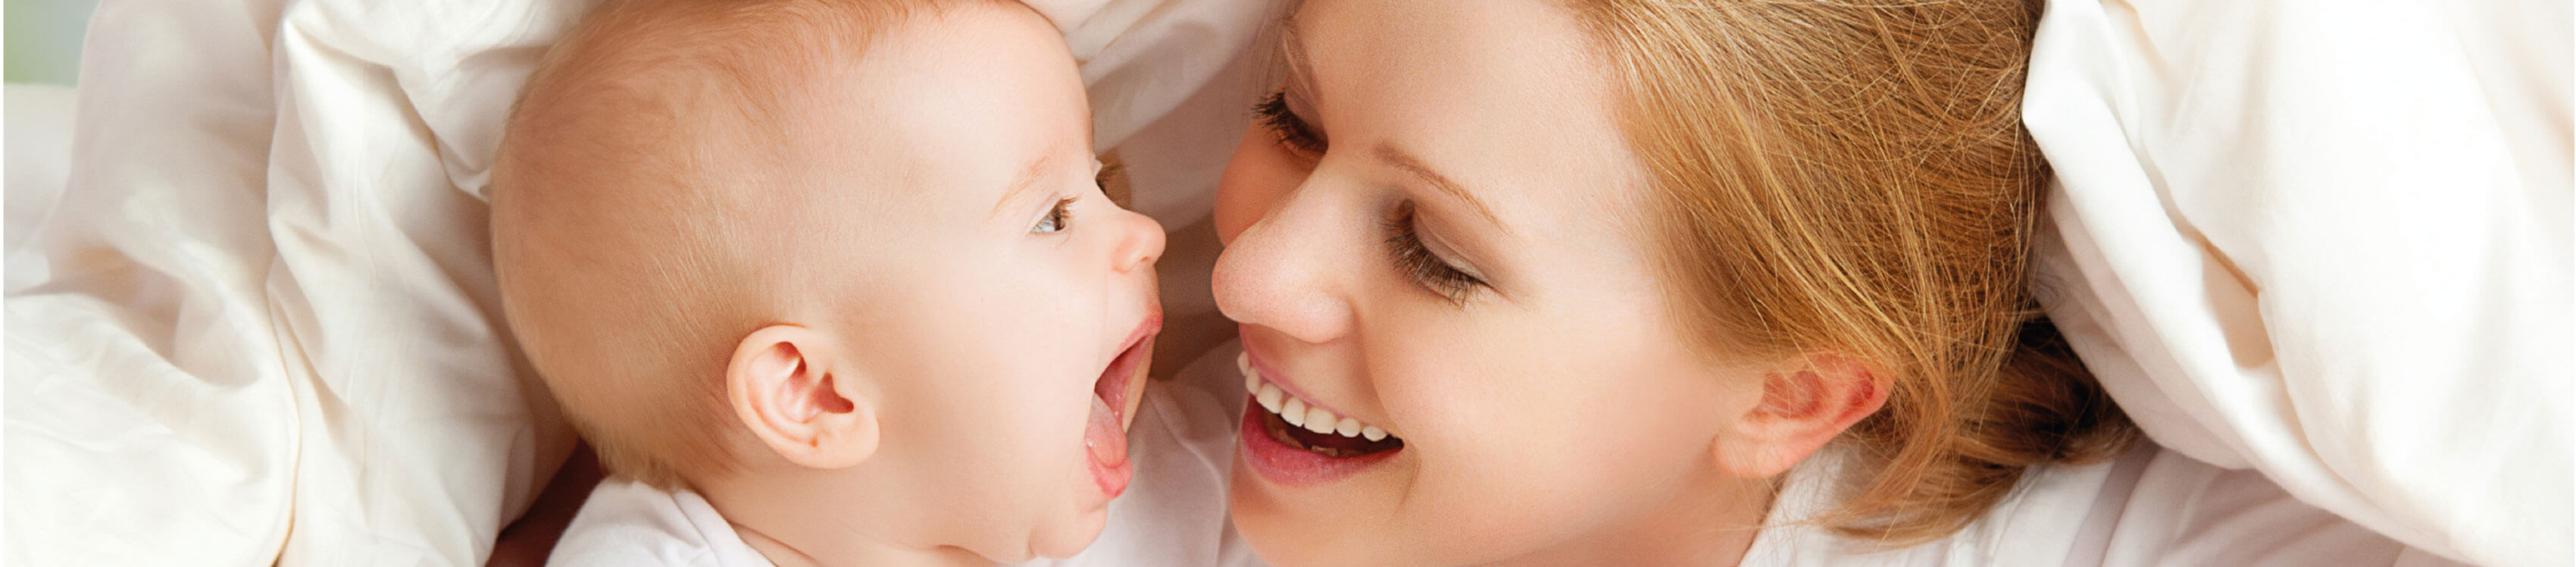 woman and baby laughing